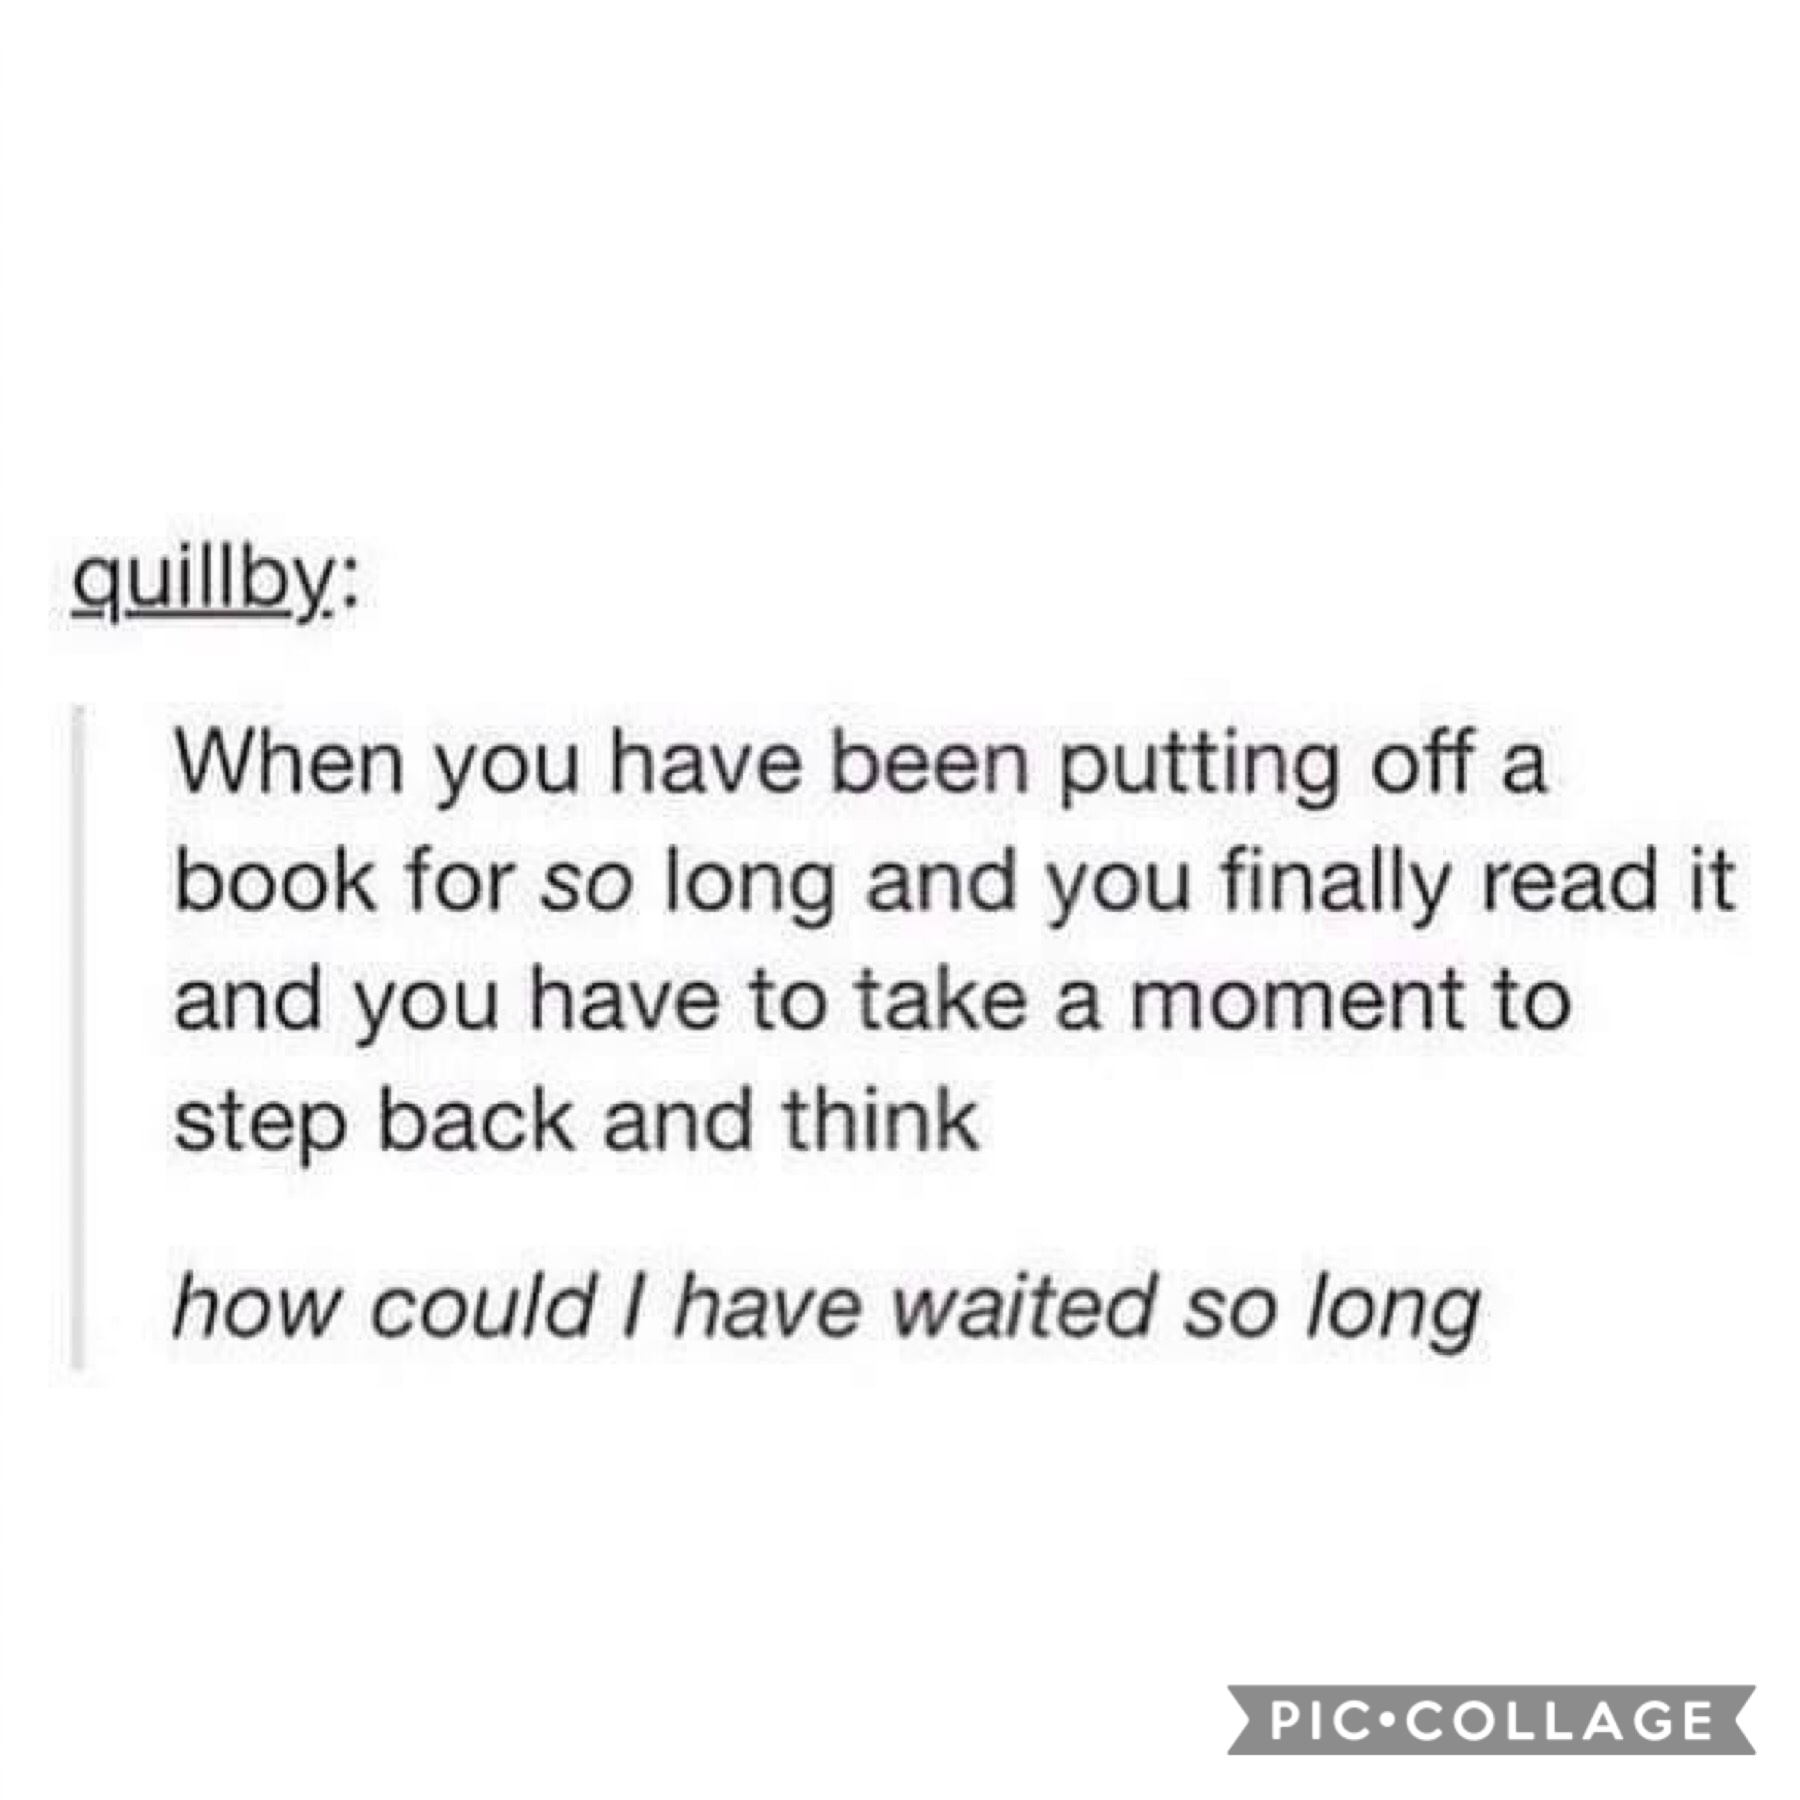 I feel aTTACKED lol; I have to speed read a book & finish it tonight which I have not started & it’s just not interesting djwjdj welp 🤠